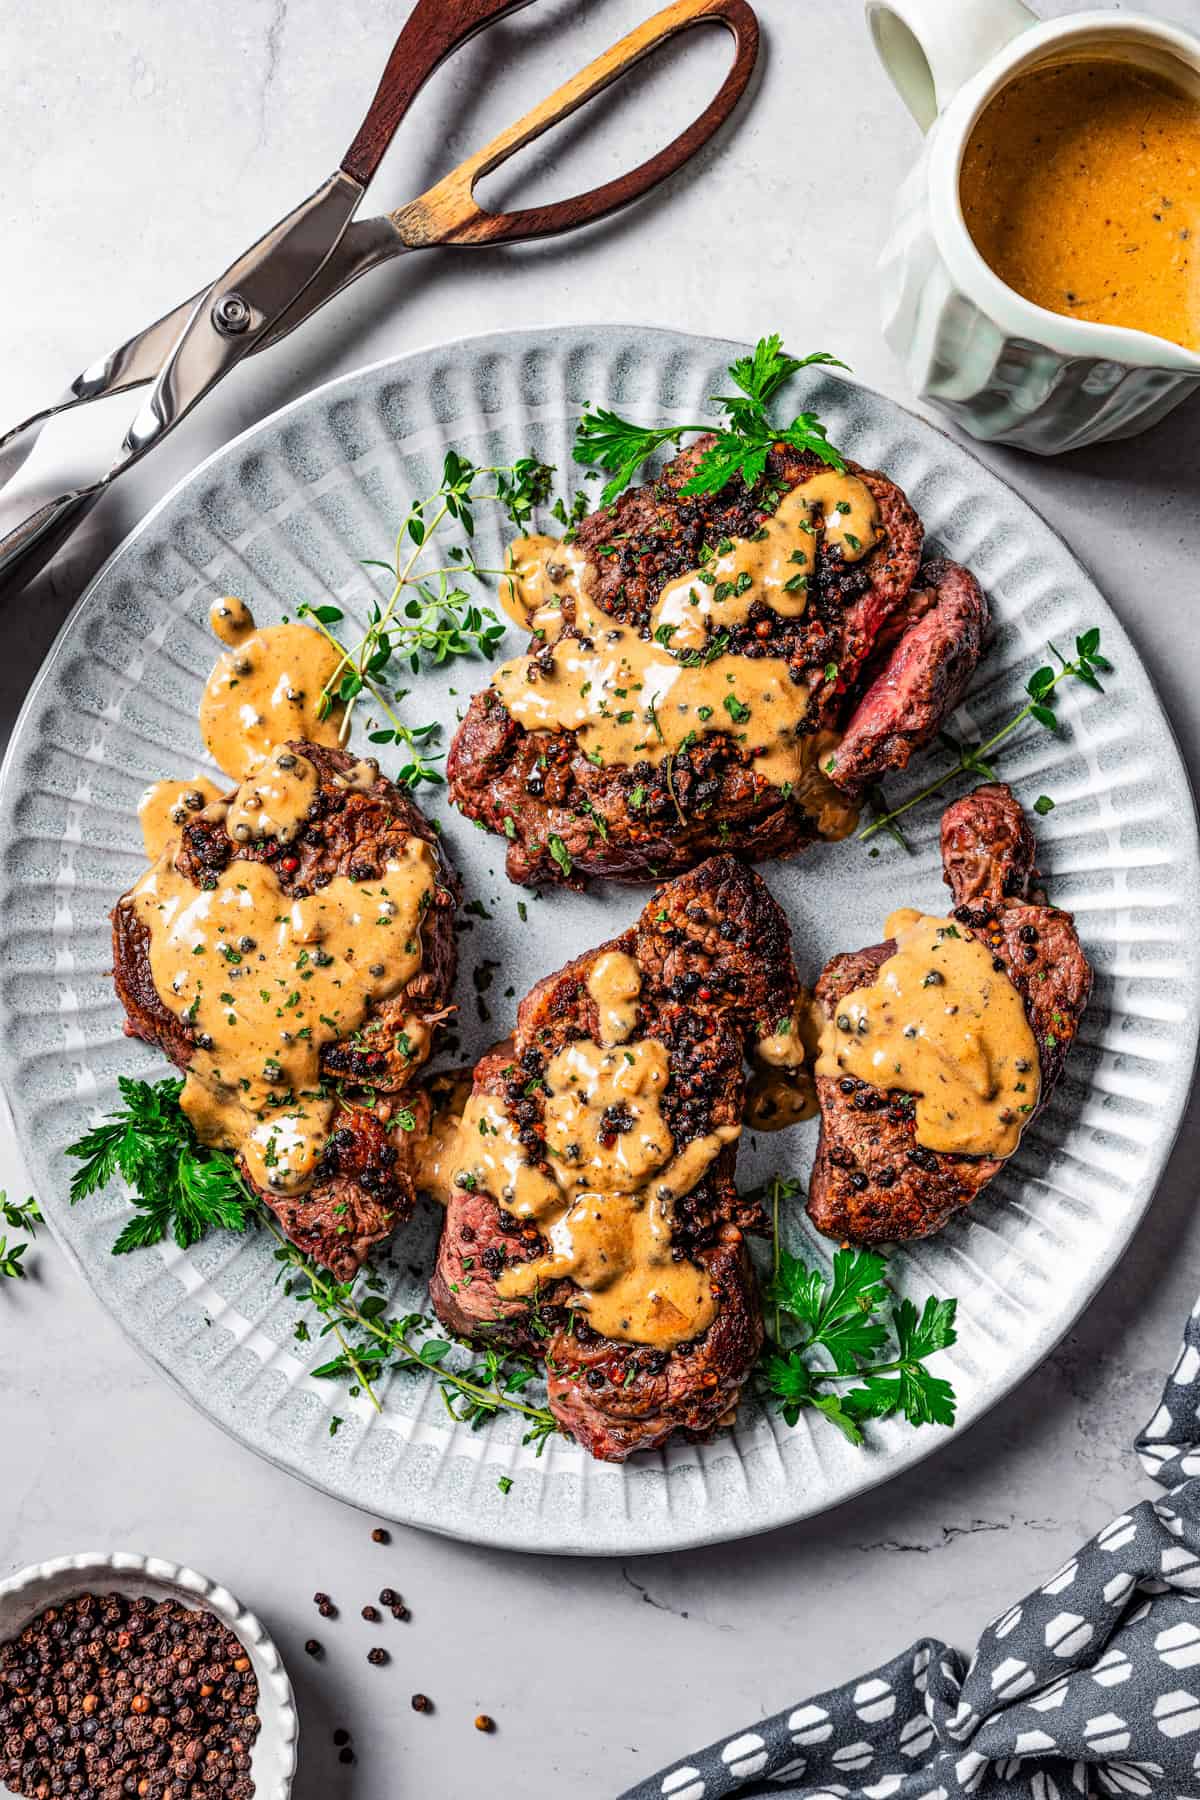 Four filet mignon steaks served on a plate and are topped with a peppercorn sauce to make steak au poivre.